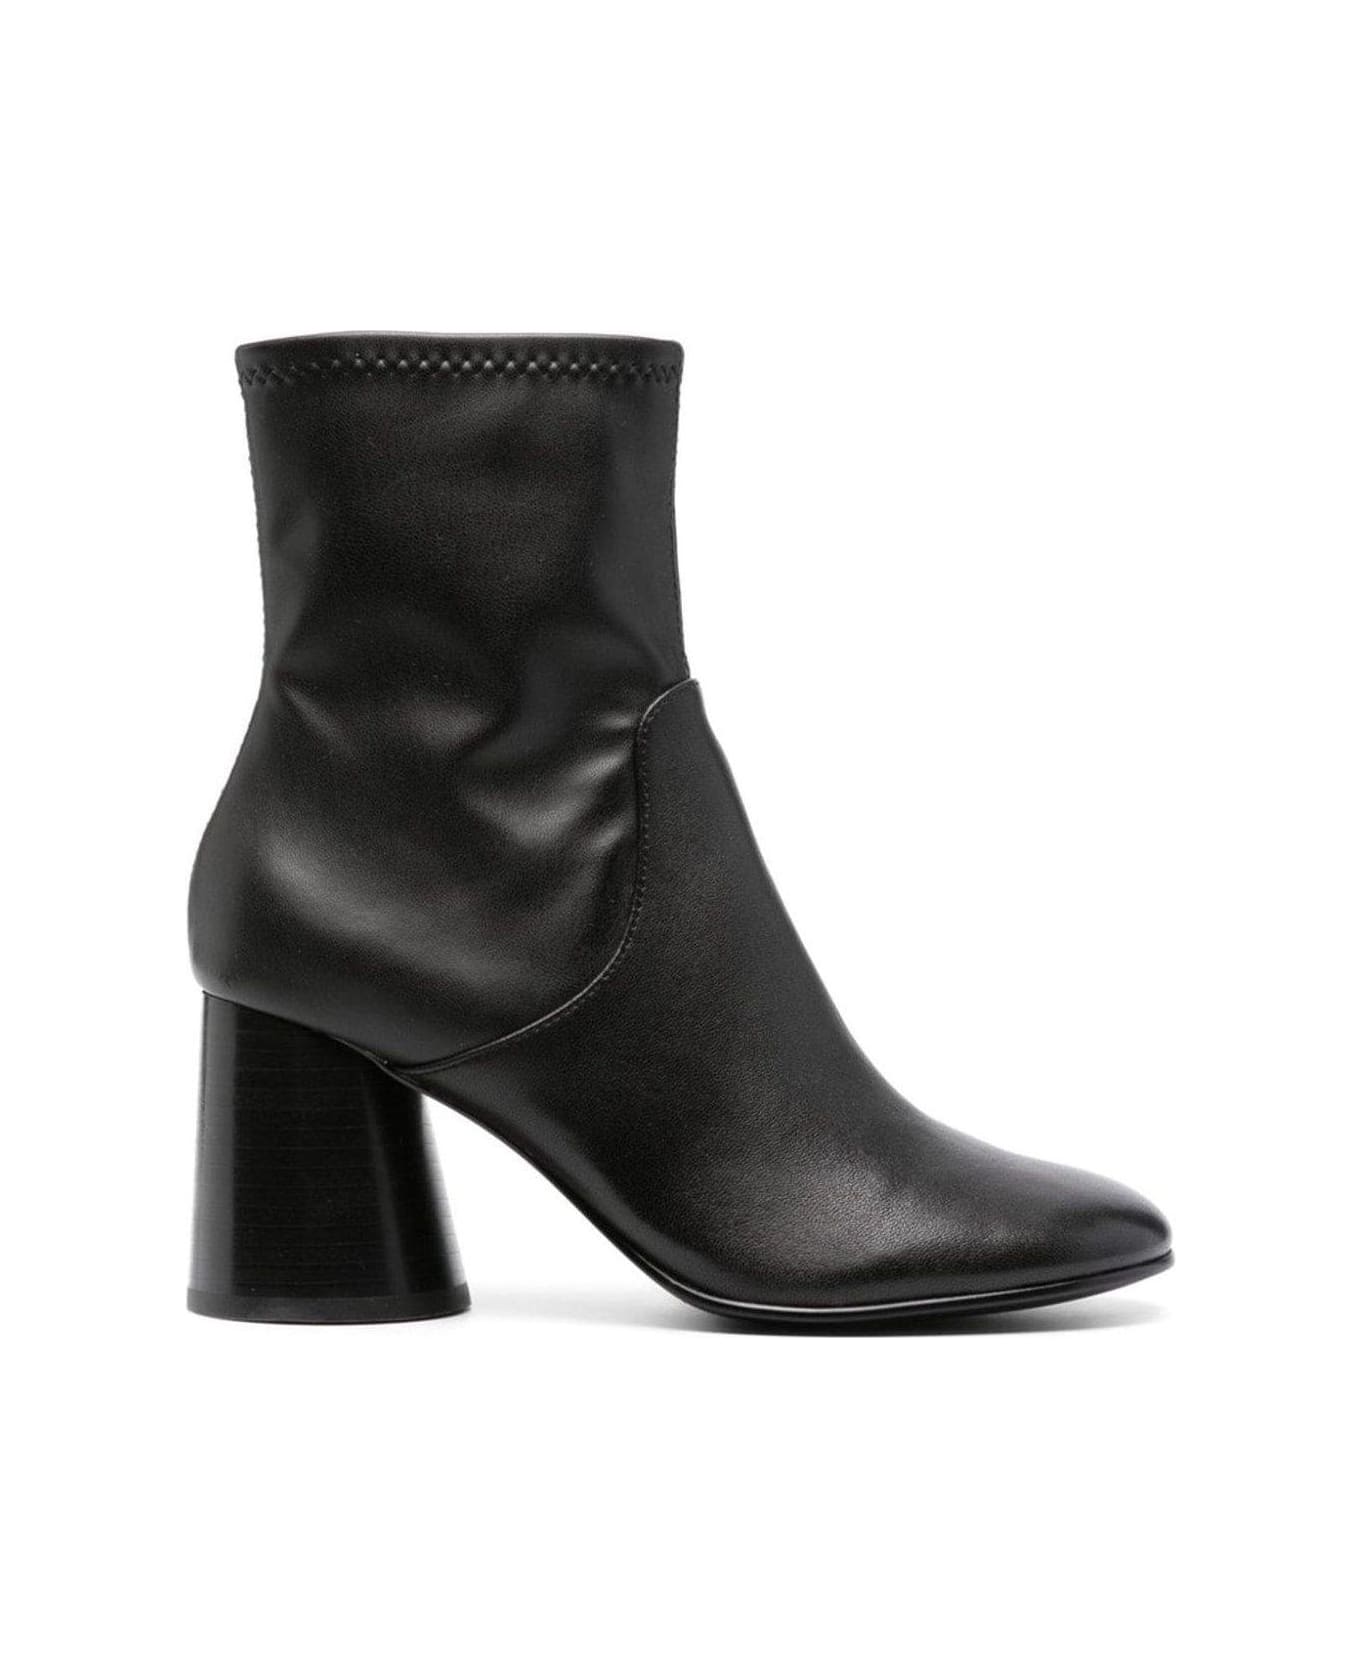 Ash Clash Zip-up Heeled Ankle Boots - BLACK